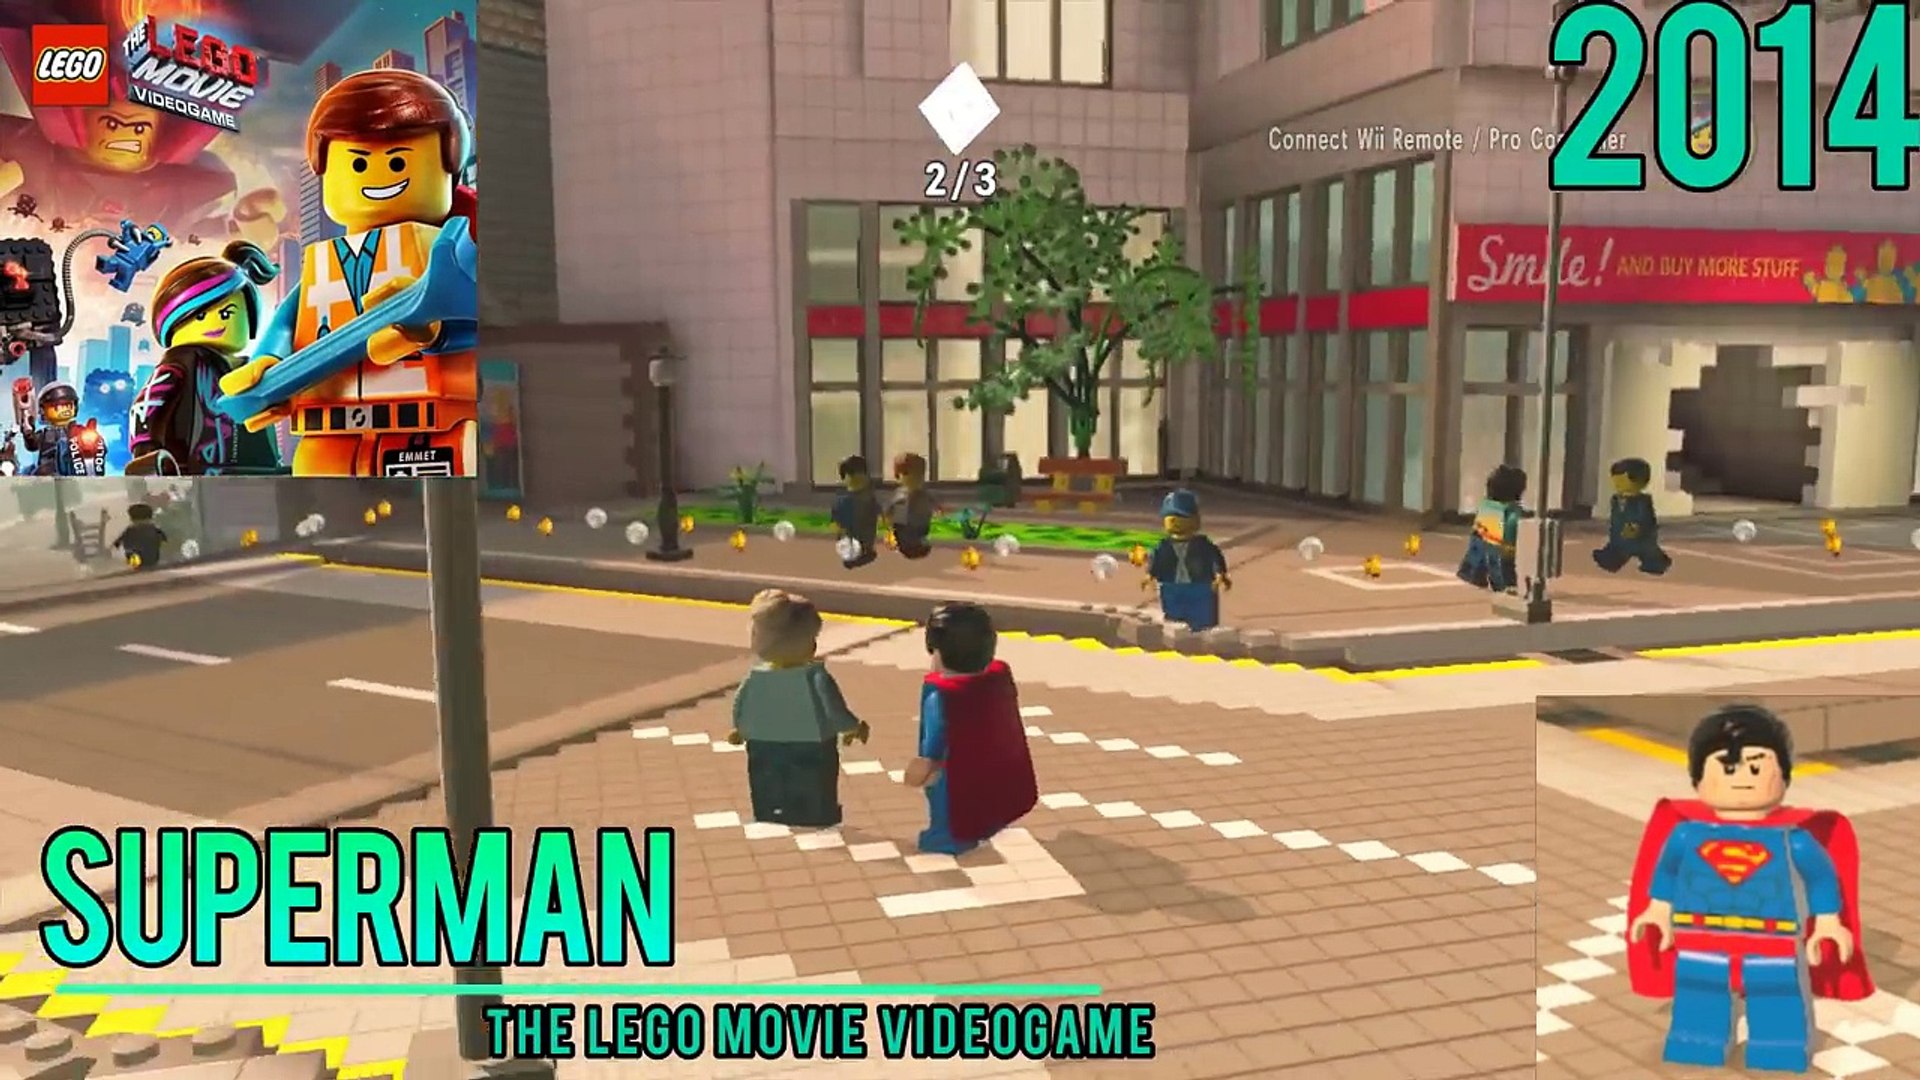 Superman Evolution in Lego Videogames - video Dailymotion